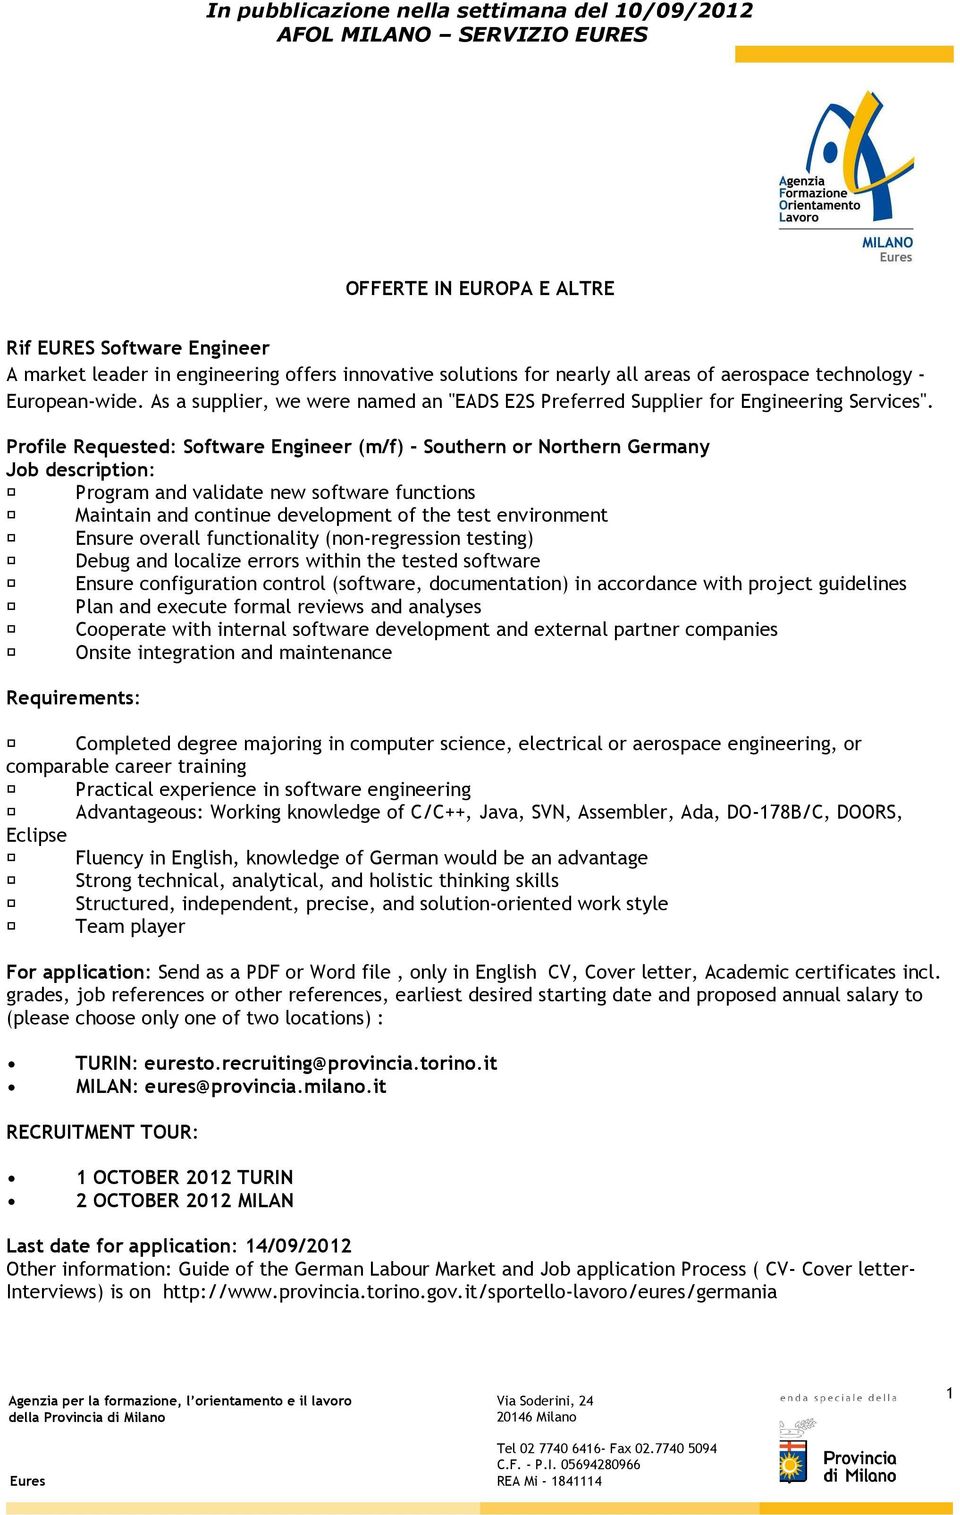 Profile Requested: Software Engineer (m/f) - Southern or Northern Germany Job description: Program and validate new software functions Maintain and continue development of the test environment Ensure